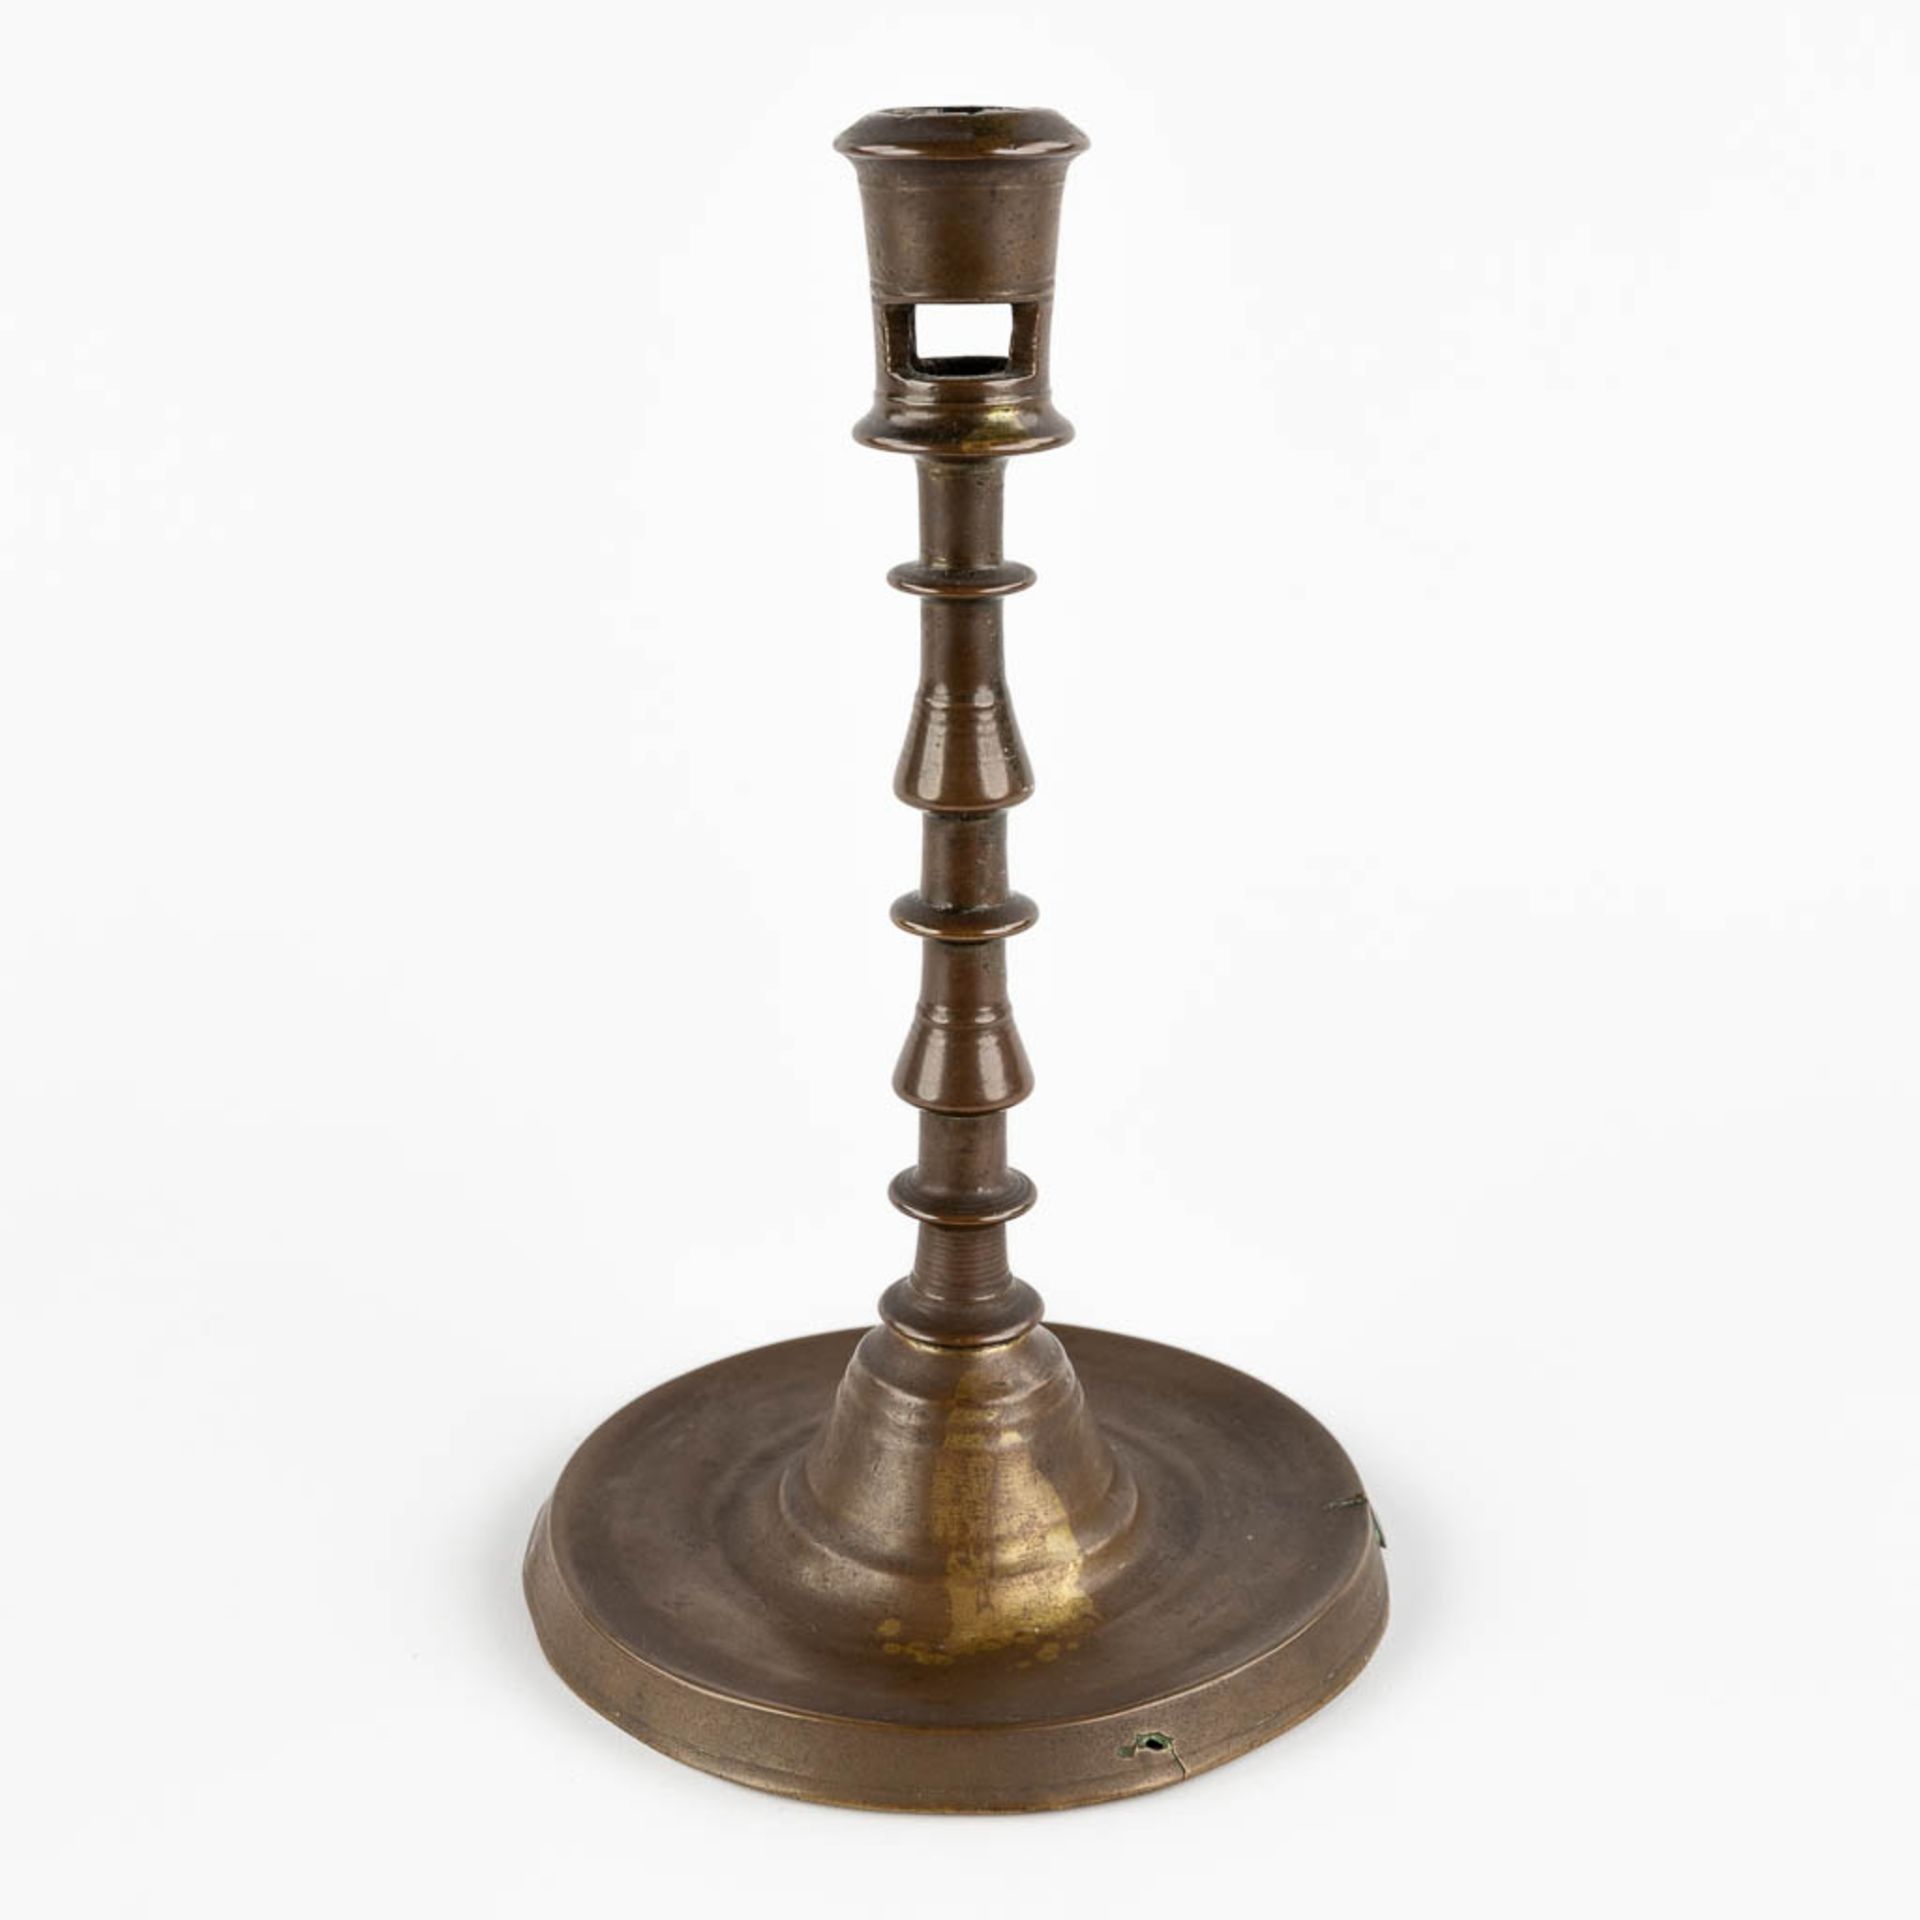 An antique candlestick, Flanders or The Netherlands, 16th C. (H:24,5 x D:14,5 cm) - Image 4 of 11